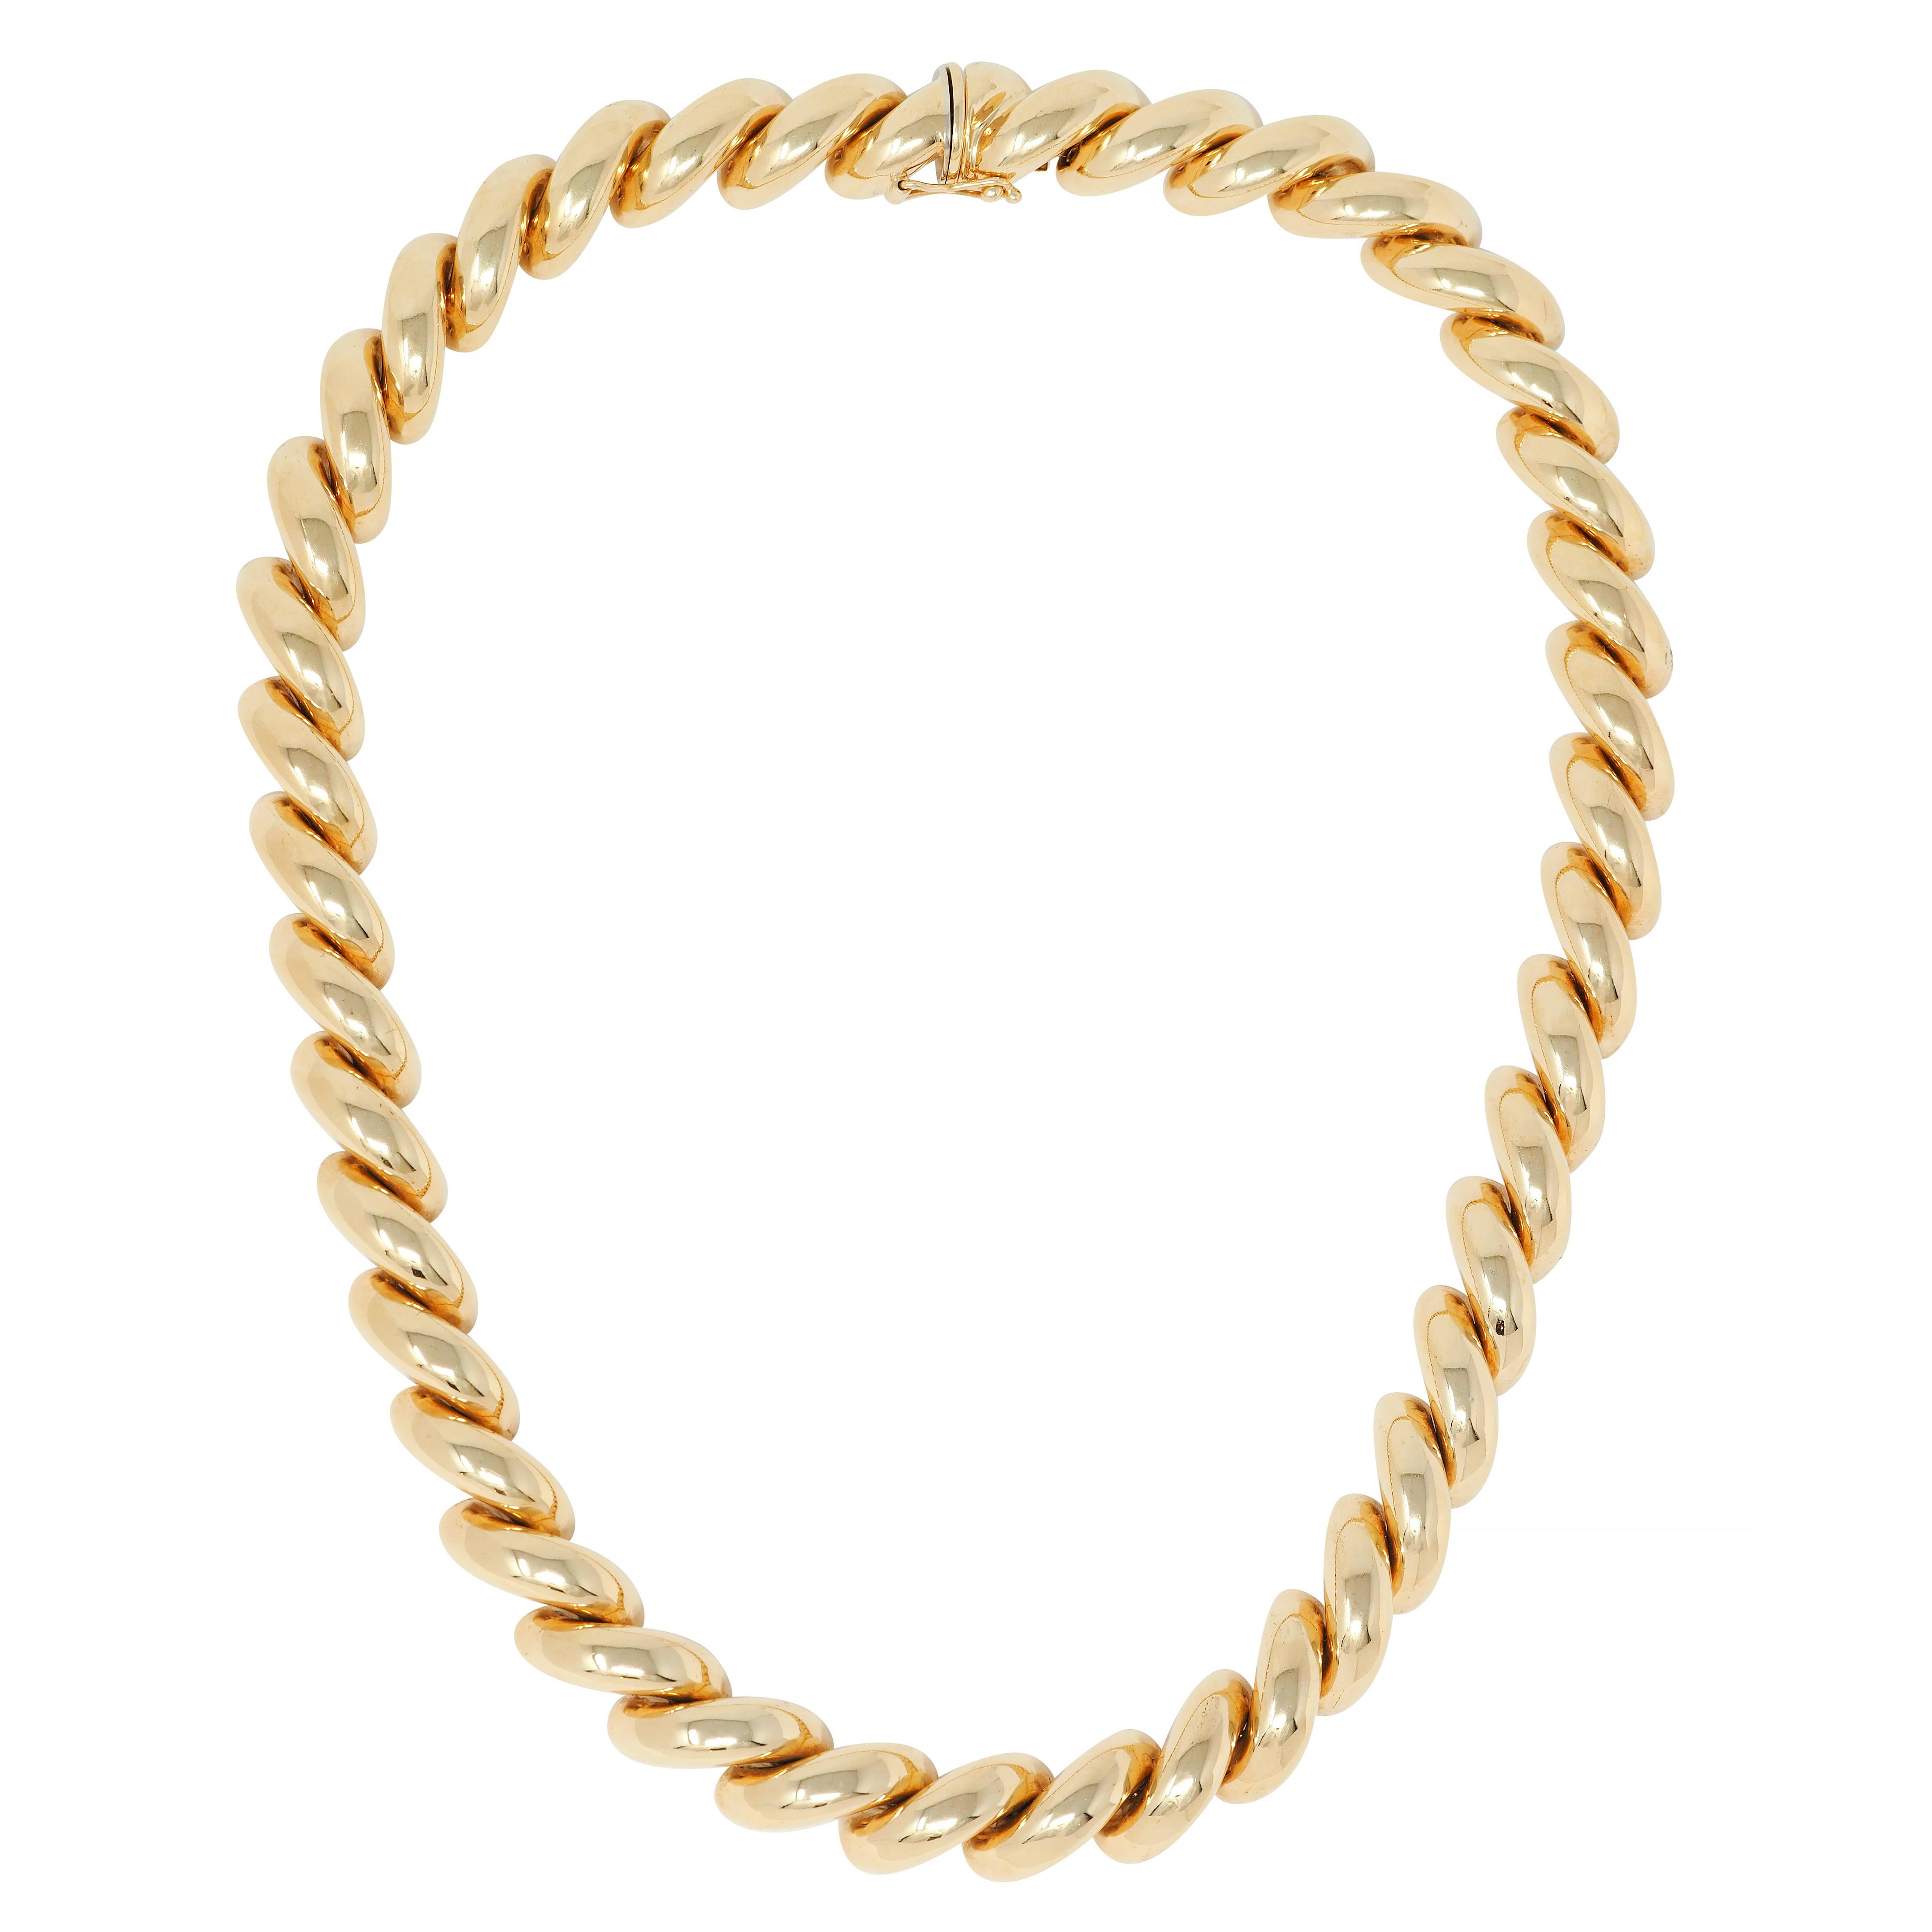 Comprised of puffed half-round links arranged as a twist motif
Featuring a high polished finish
Completed by hidden clasp closure 
With figure eight safety
Stamped 14k for 14 karat gold
Fully signed Tiffany, Italy
Circa: 1960's
Width at widest: 1/2